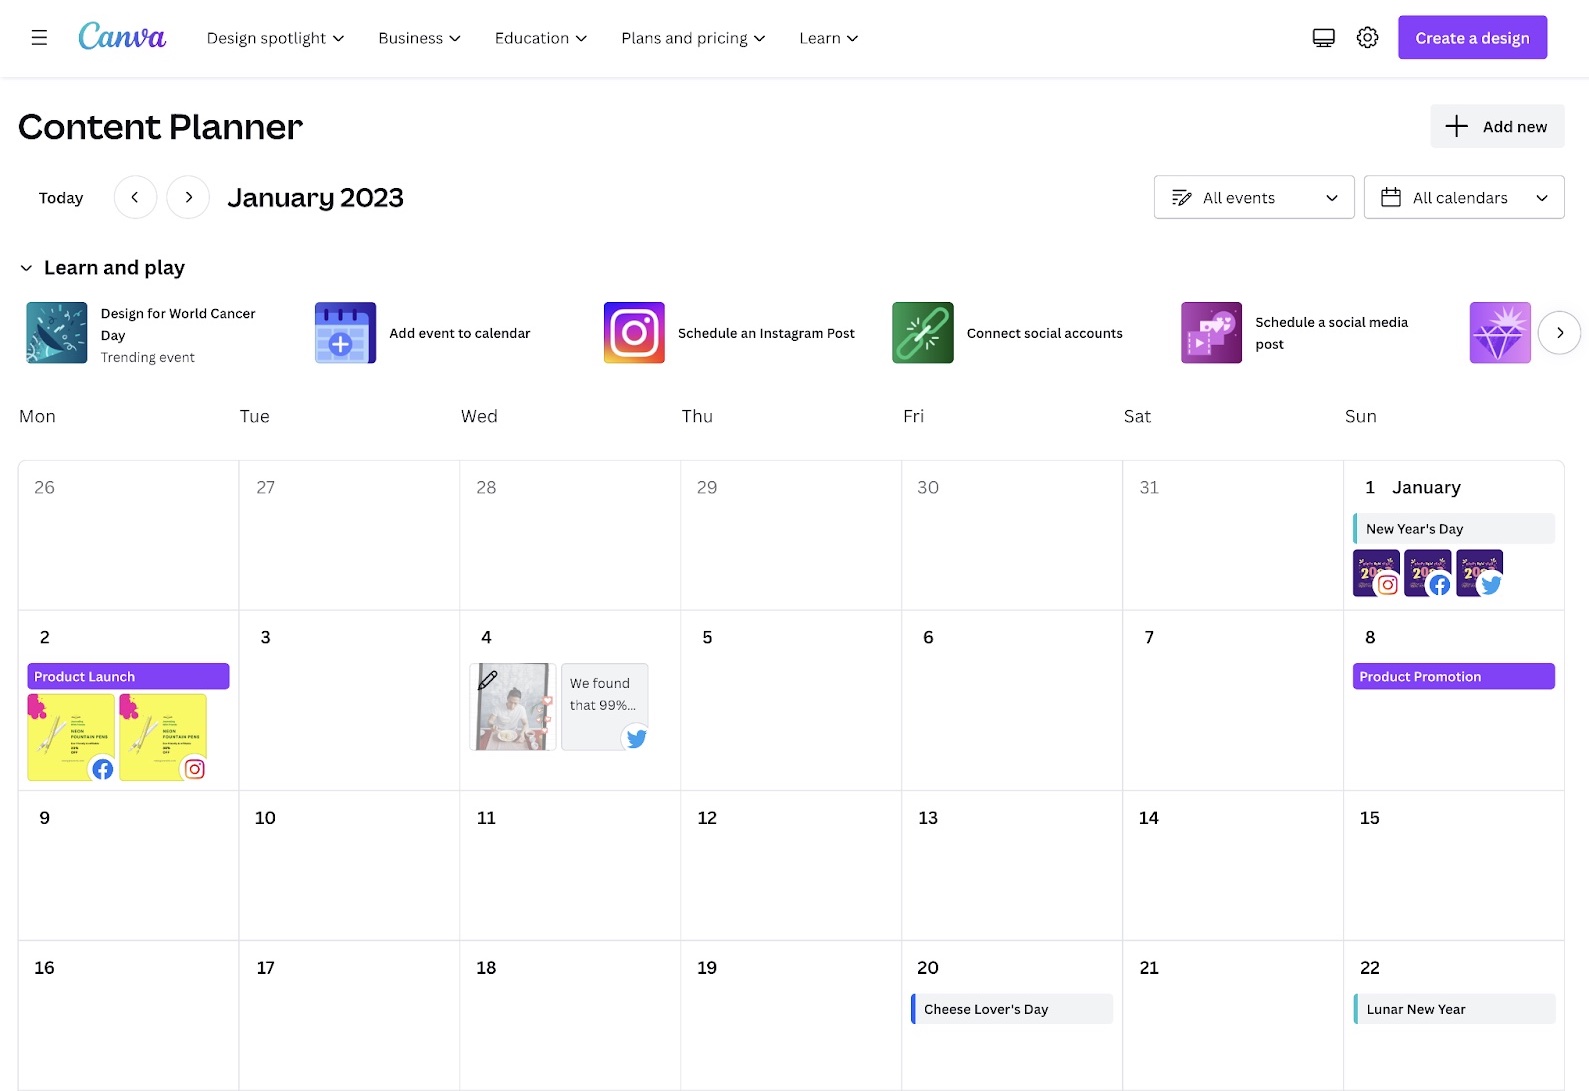 Calendar presumption    of 'Content Planner' connected  Canva showing the posts scheduled crossed  societal  media platforms connected  each   time  of the month.